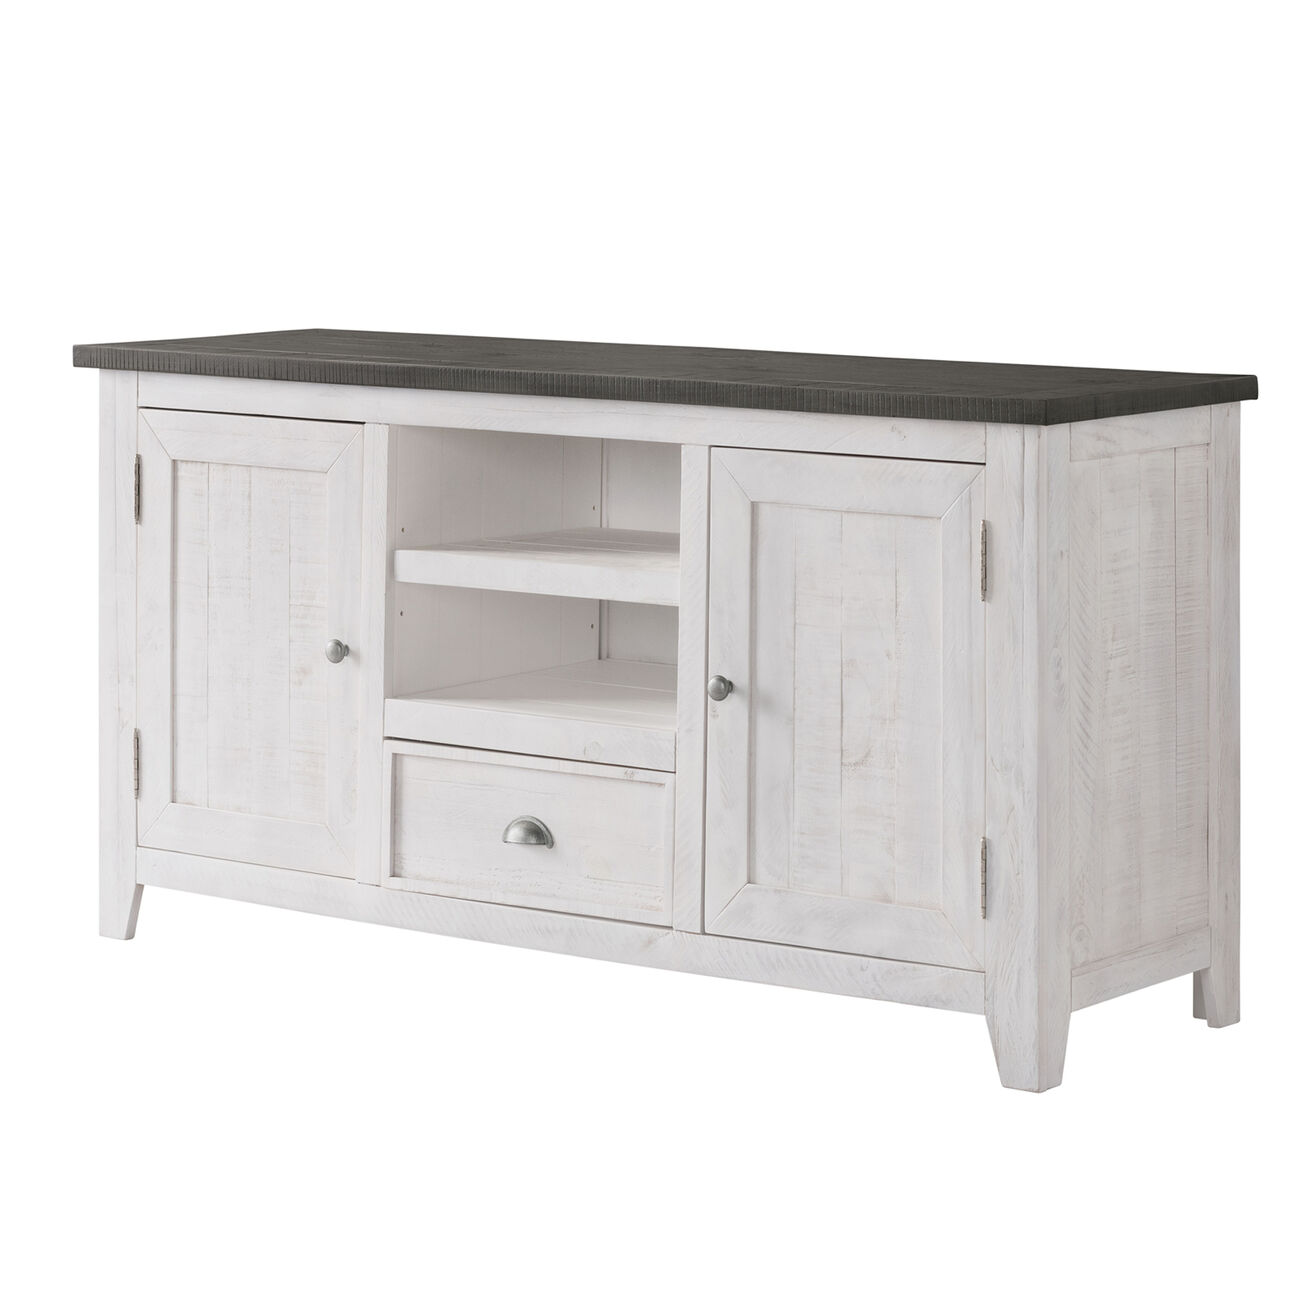 Coastal Wooden TV Stand with 2 Cabinets and 1 Drawer, White and Gray